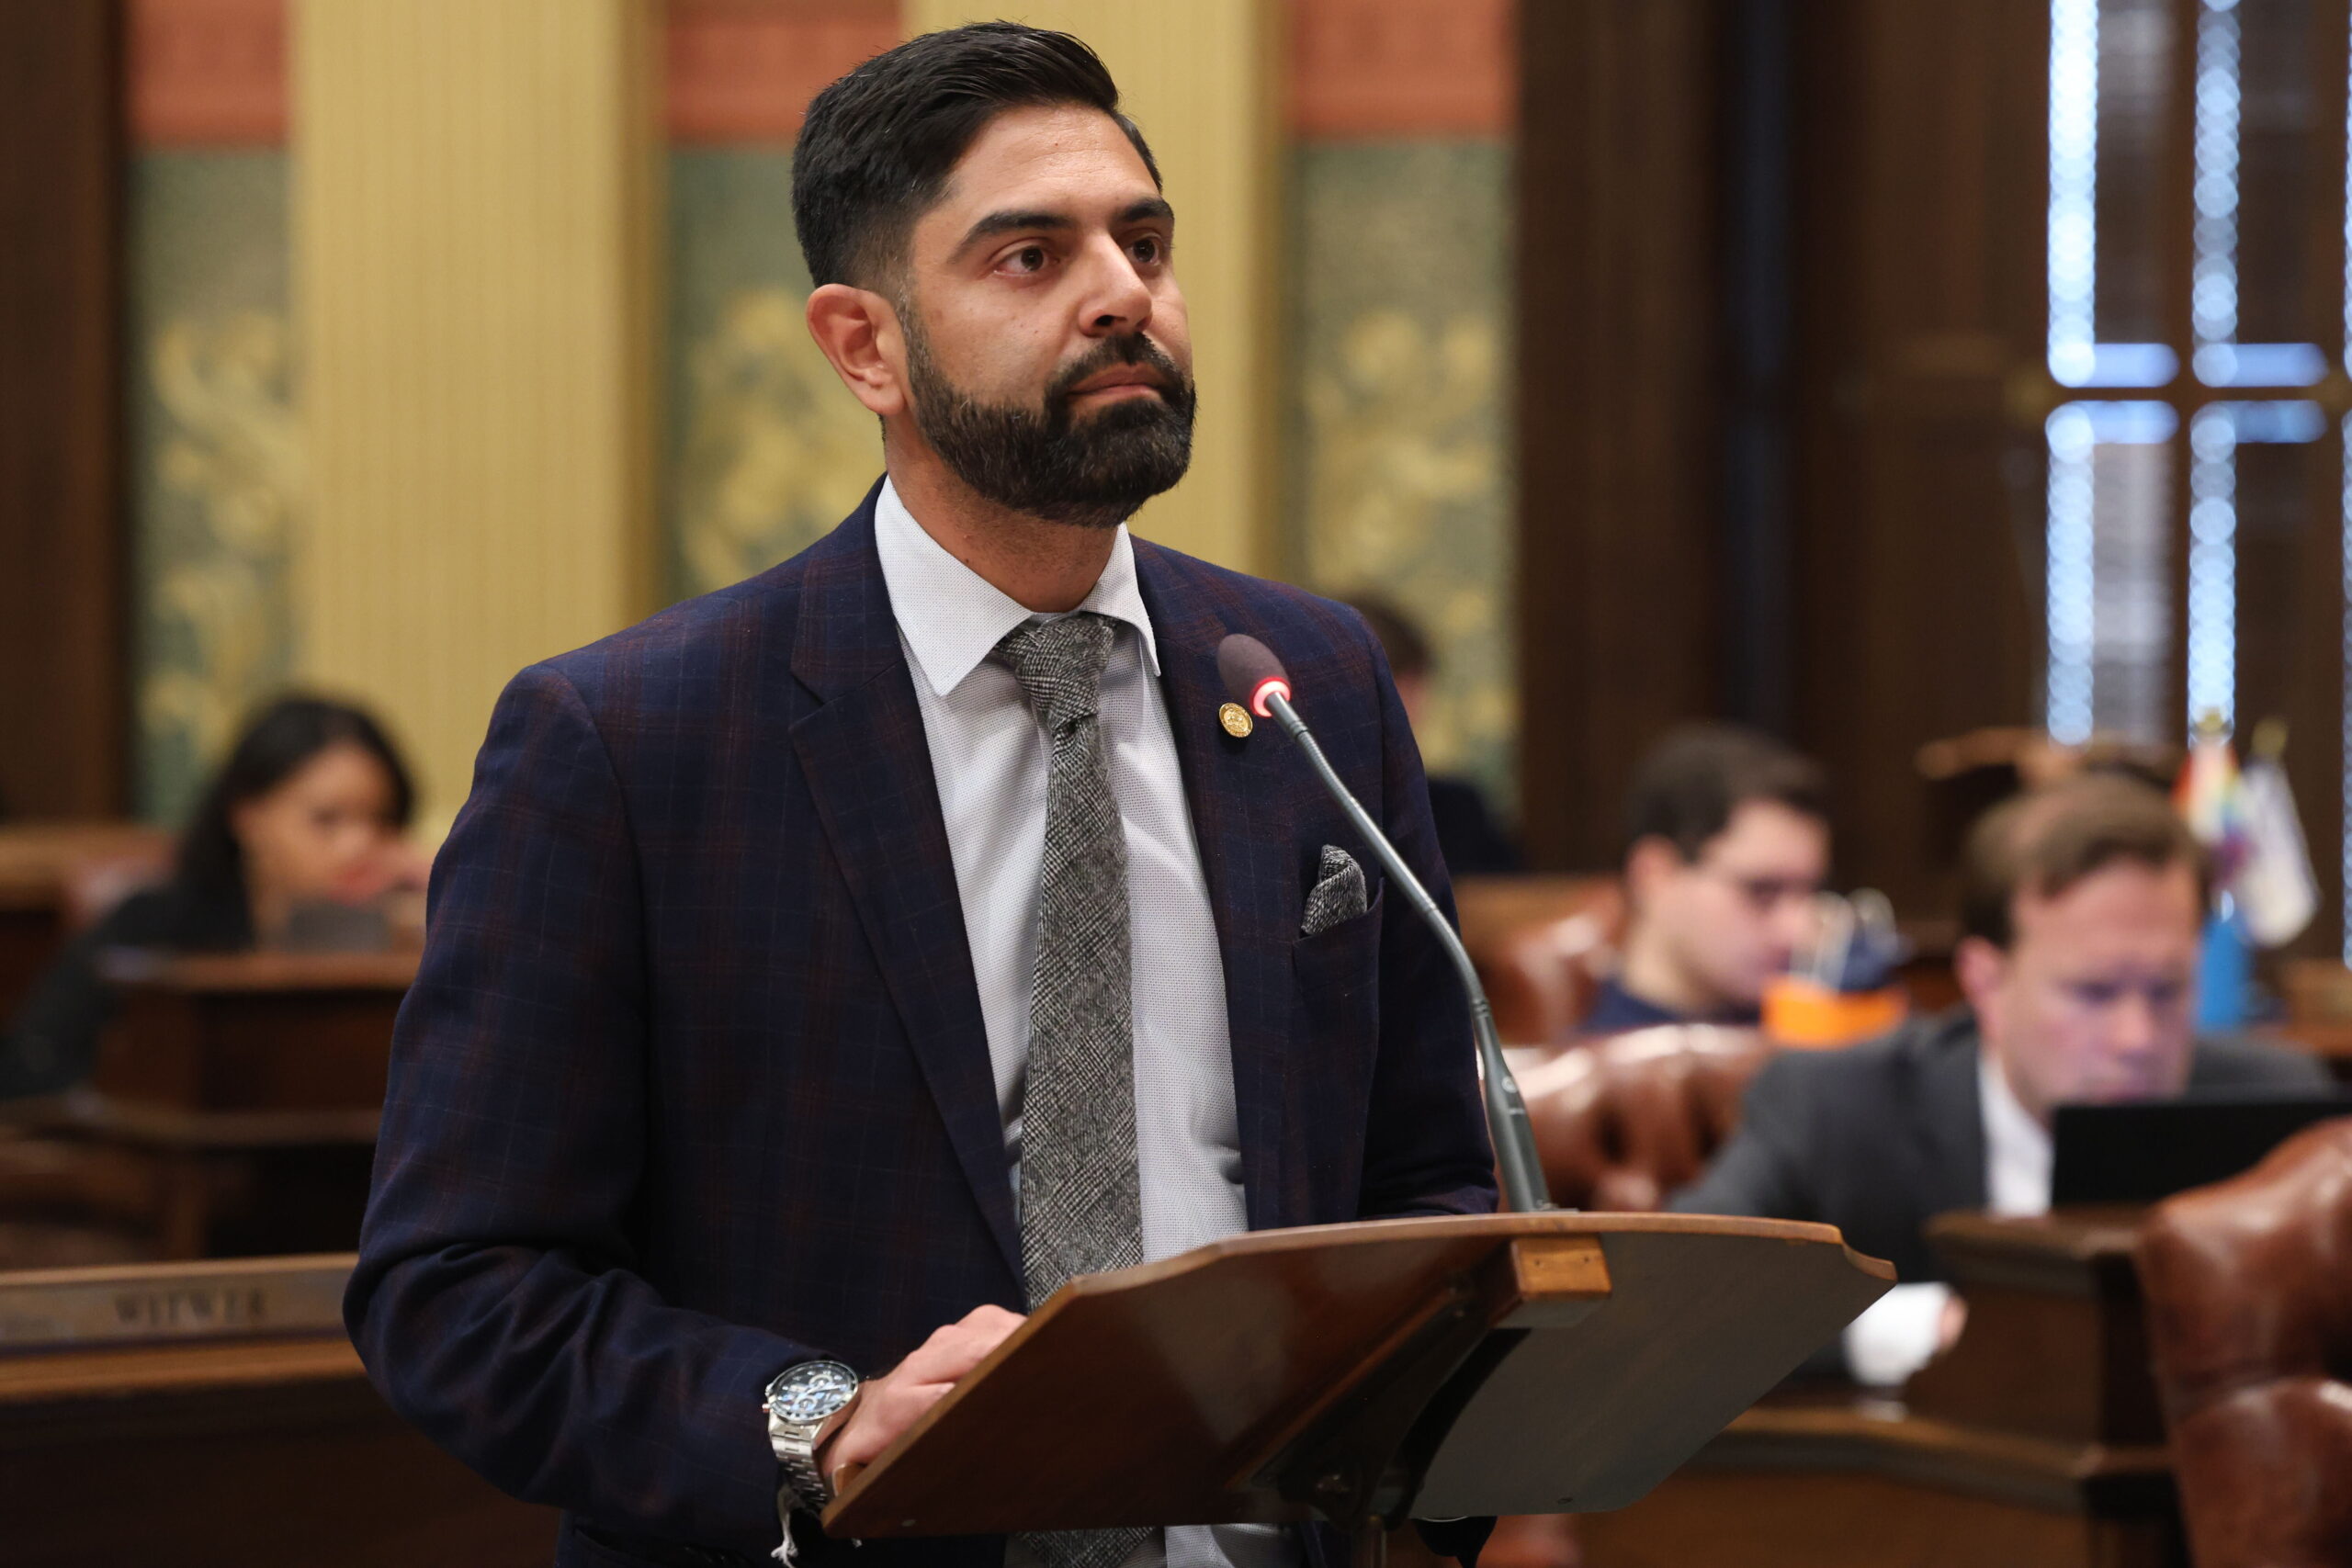 State Rep. Ranjeev Puri delivers a speech at a podium on the floor of the Michigan House.